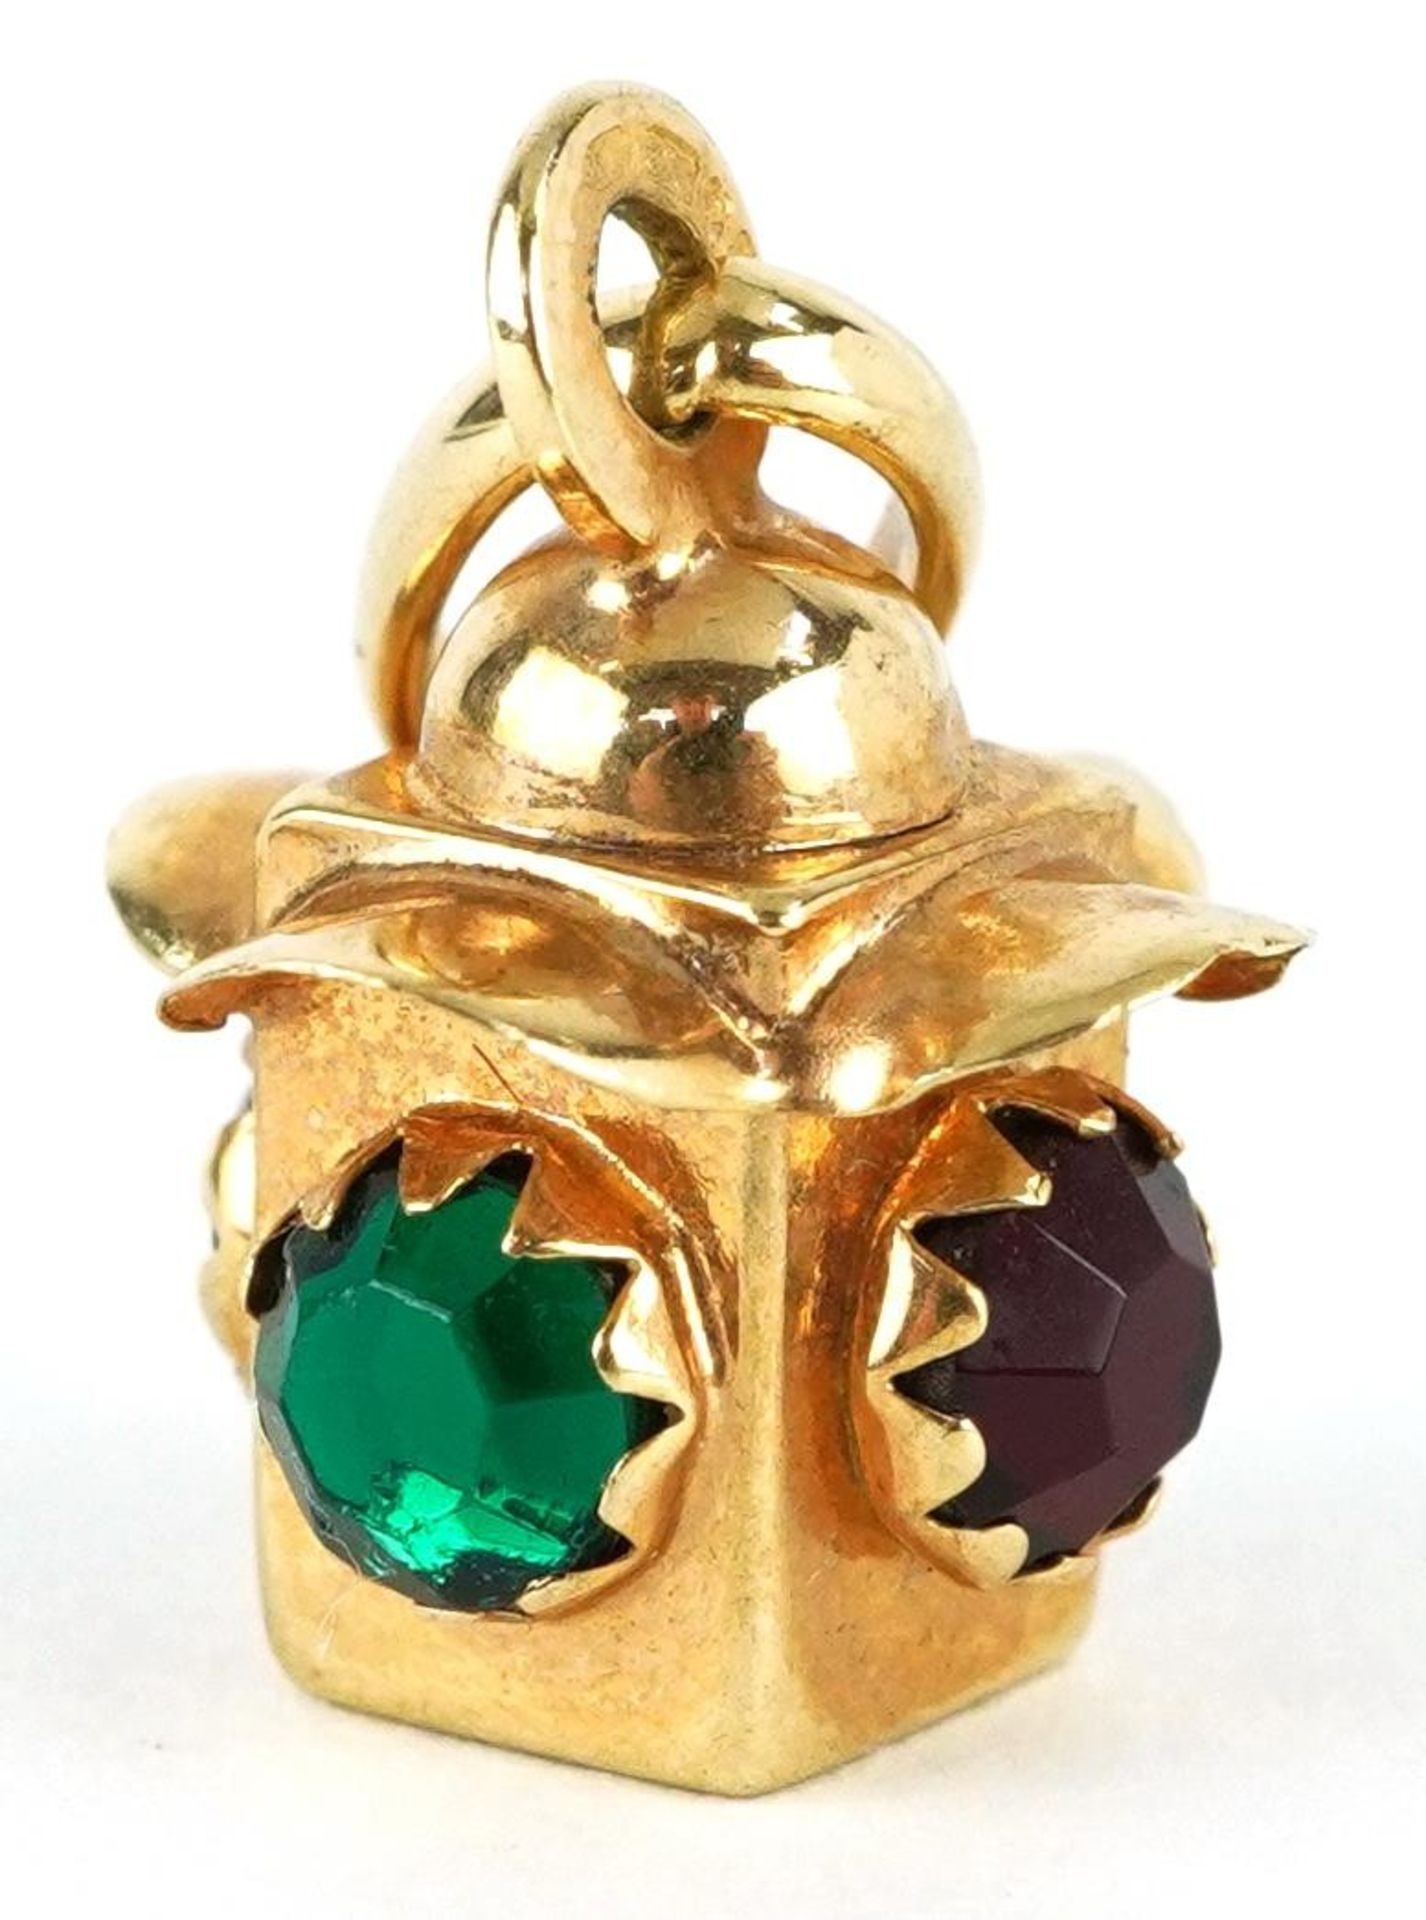 9ct gold lantern charm set with red and green stones, 2.2cm high, 2.0g